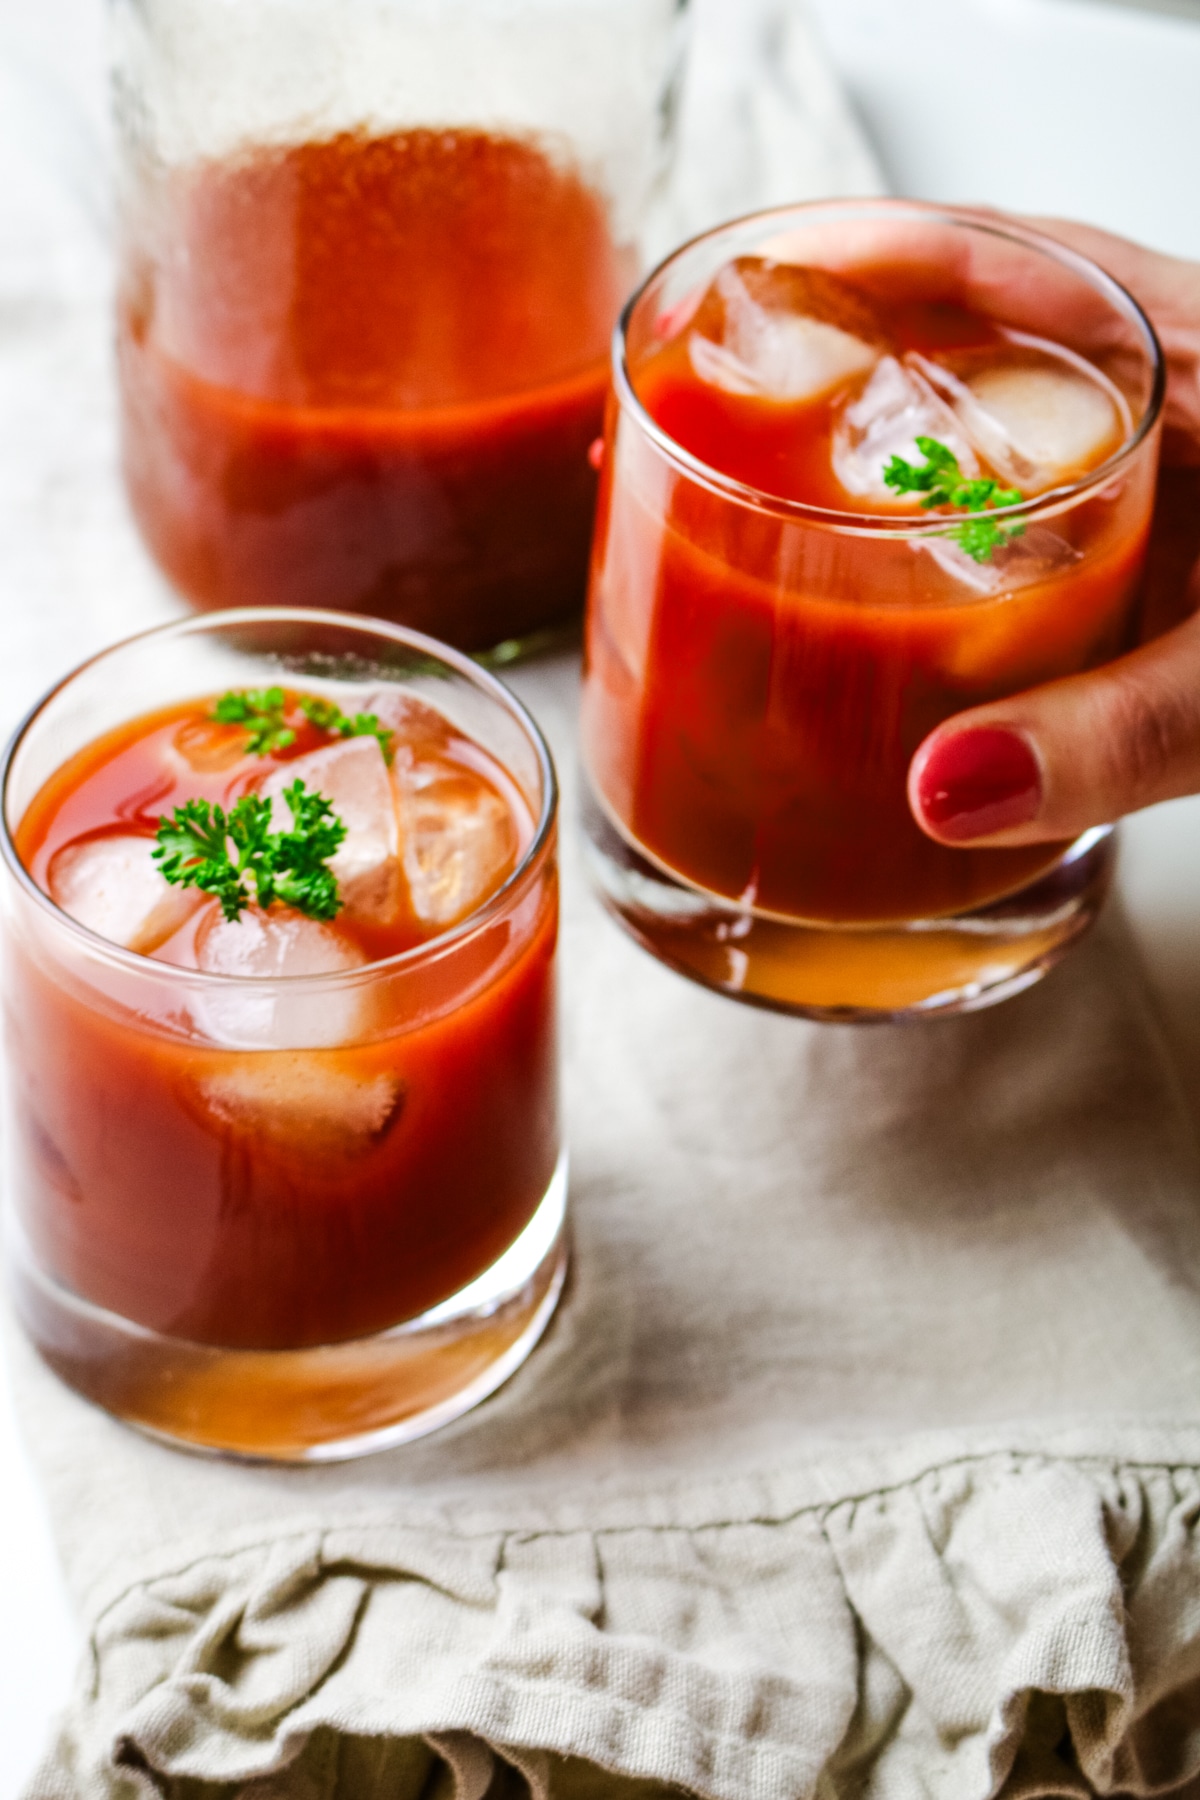 tomato juice in 2 glasses with one hand picking up one glass.